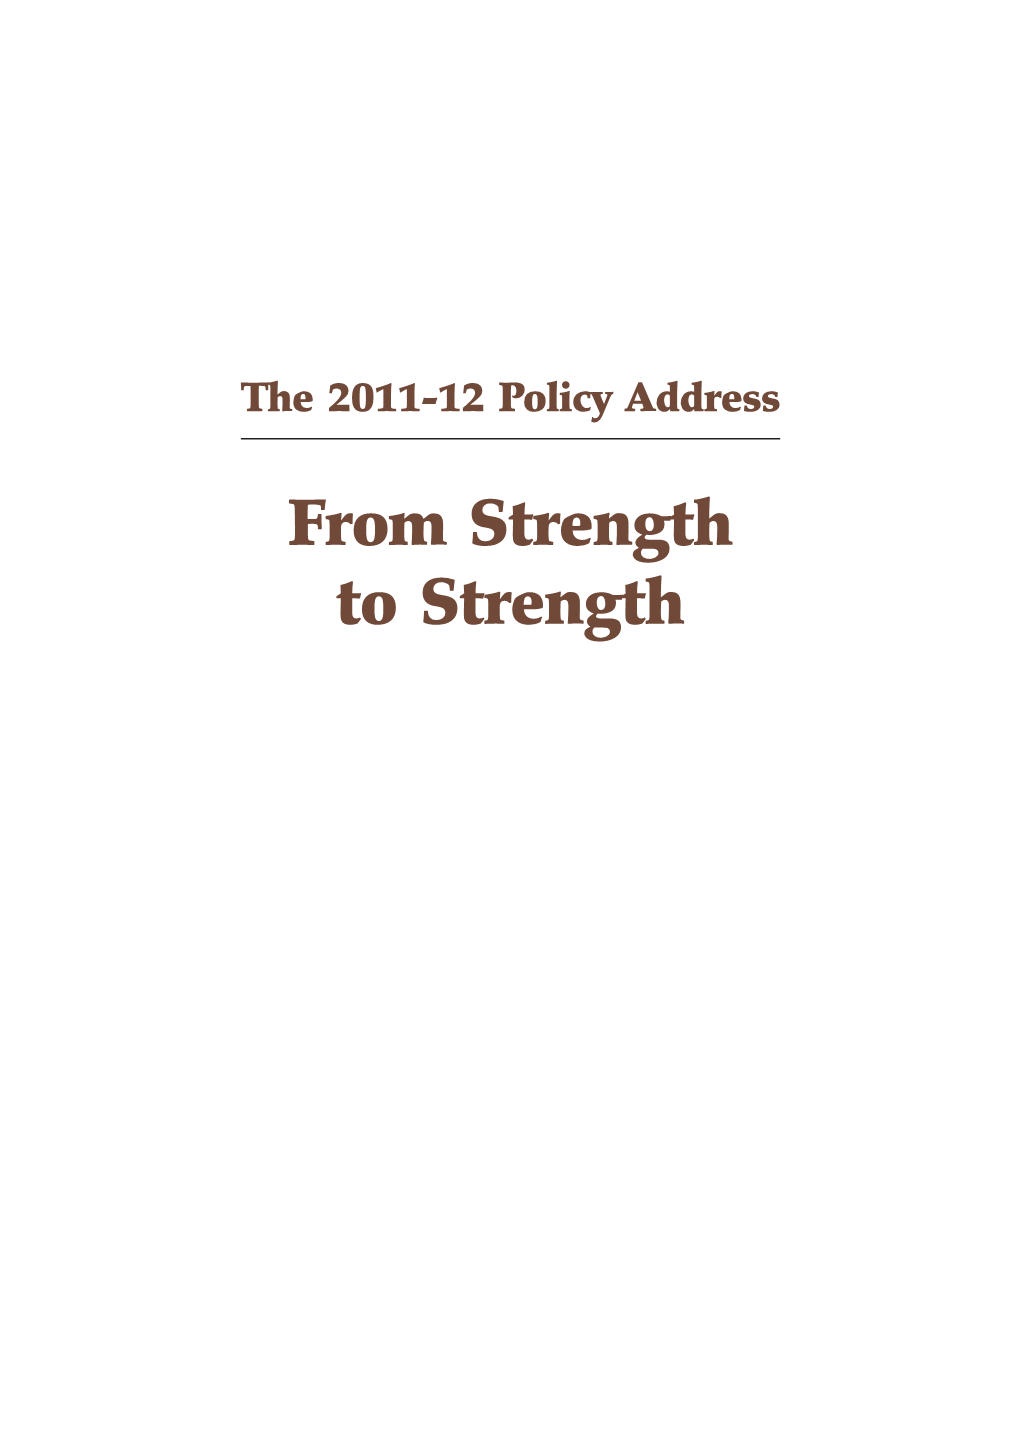 The 2011-12 Policy Address